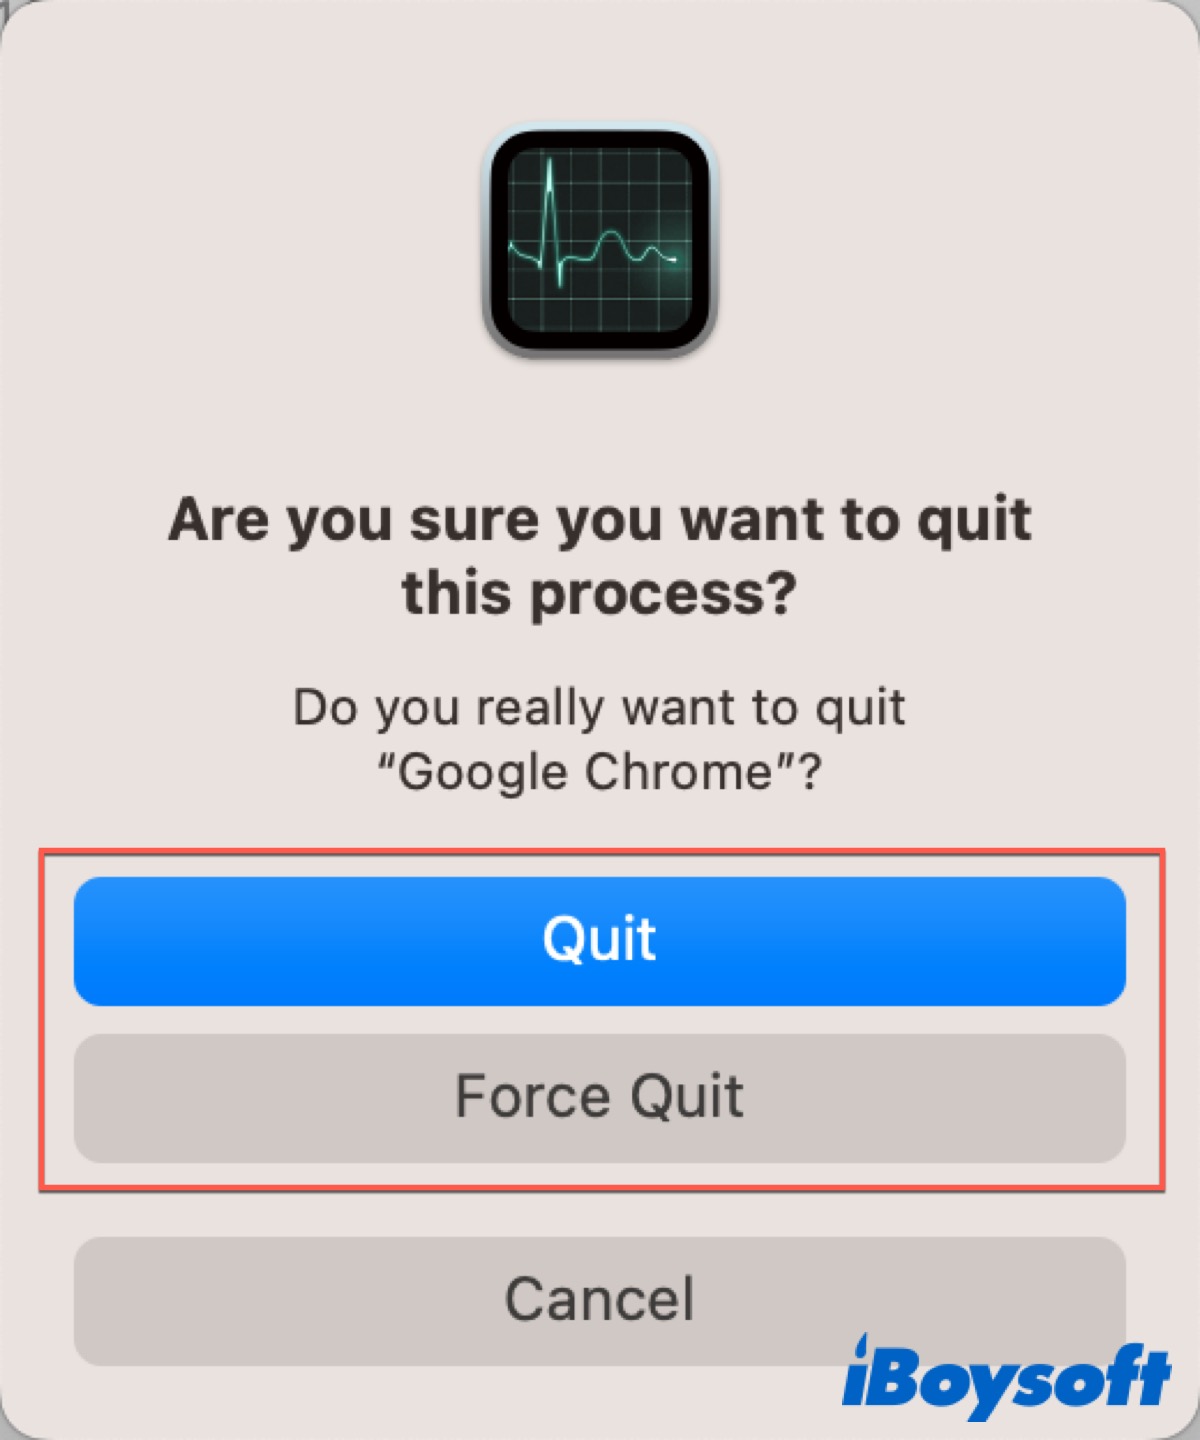 Use Activity Monitor to quit process